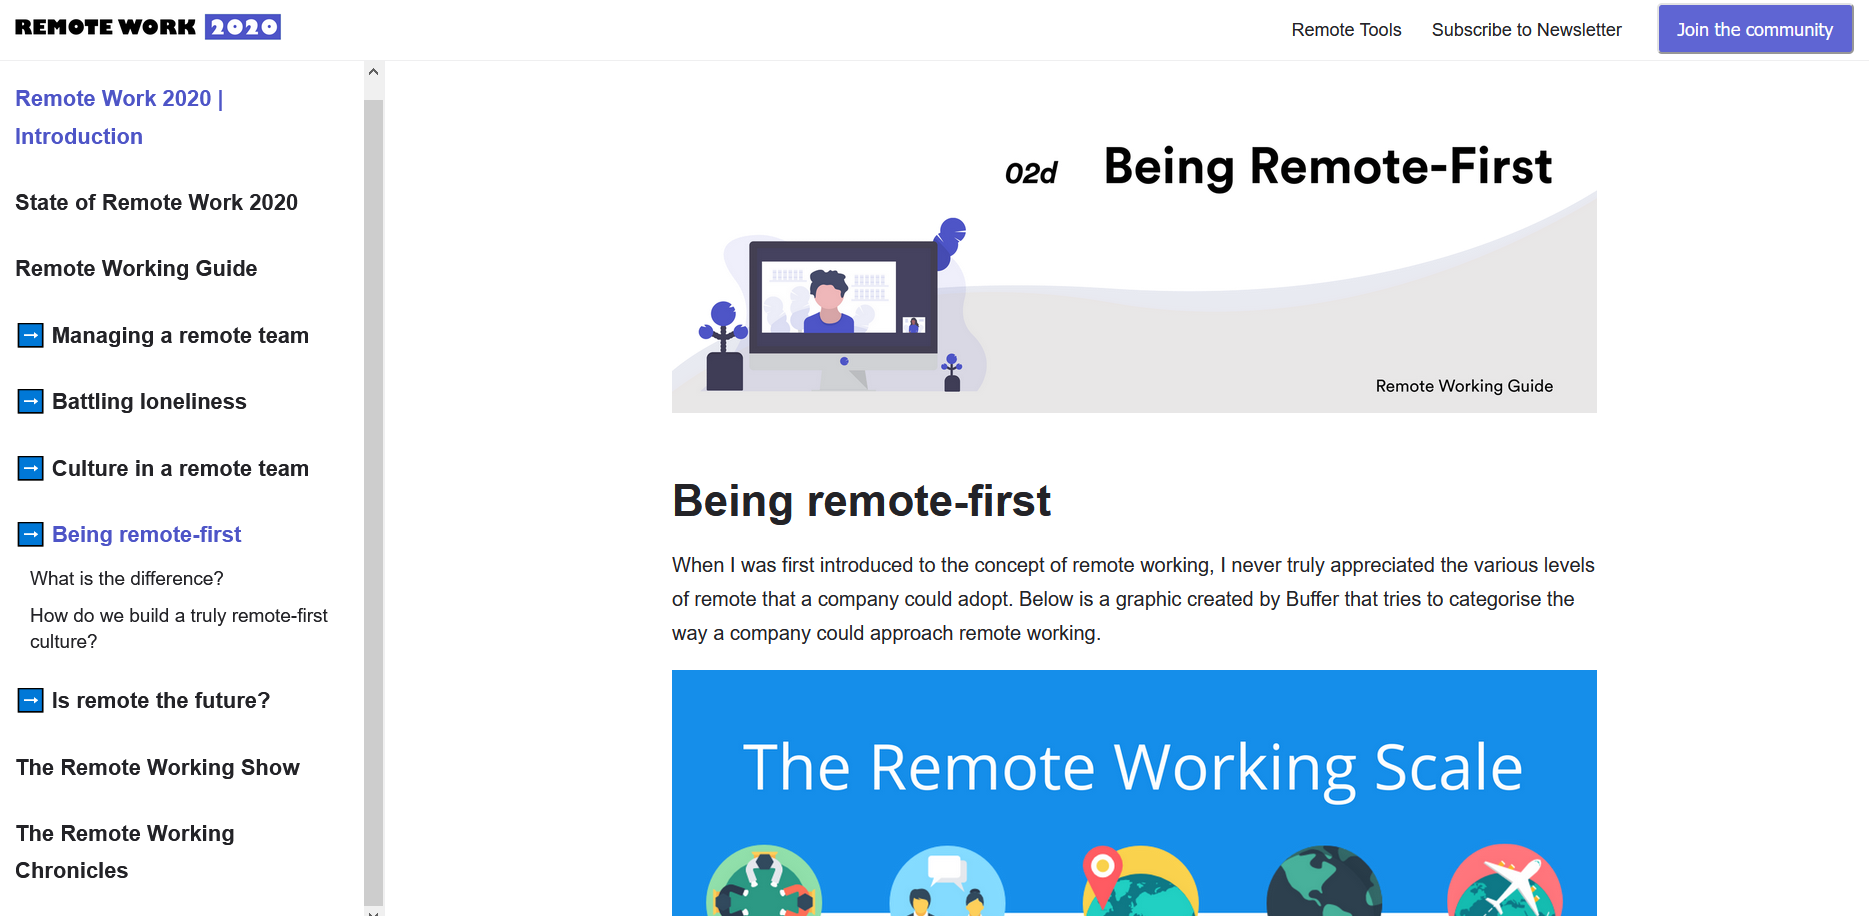 Detailed reviews and information for remote teams Remote Work 2020